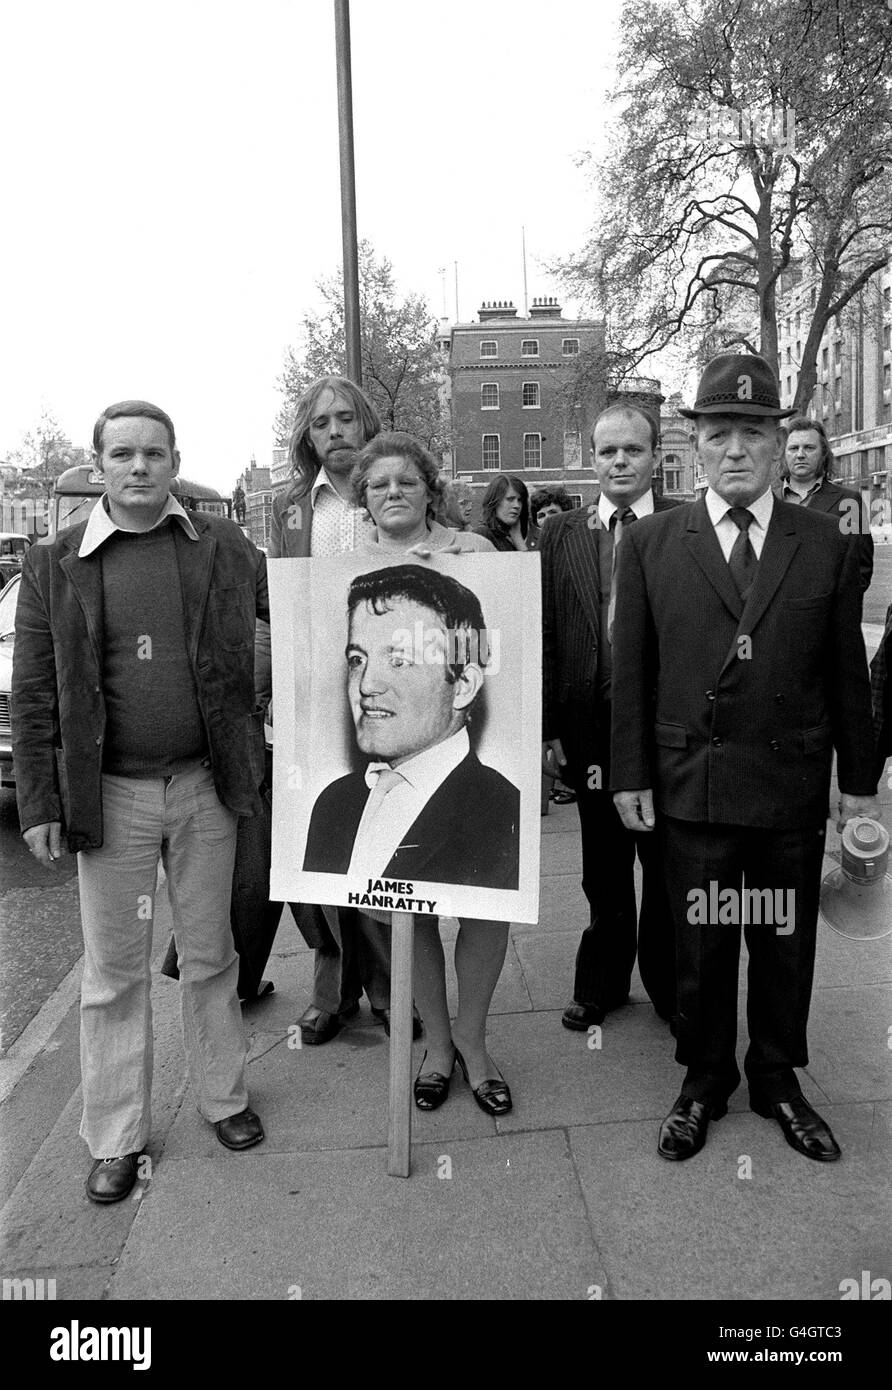 PA NEWS PHOTO 12/5/74 : MR. AND MRS. JAMES HANRATTY MARCHING TO 10 DOWNING STREET IN LONDON WITH PETITION TO SUPPORT THEIR SON JAMES ACCUSED OF THE A6 MURDER CASE. JAMES HANRATTY WAS HANGED 4/4/62 AT BEDFORD PRISON. Stock Photo